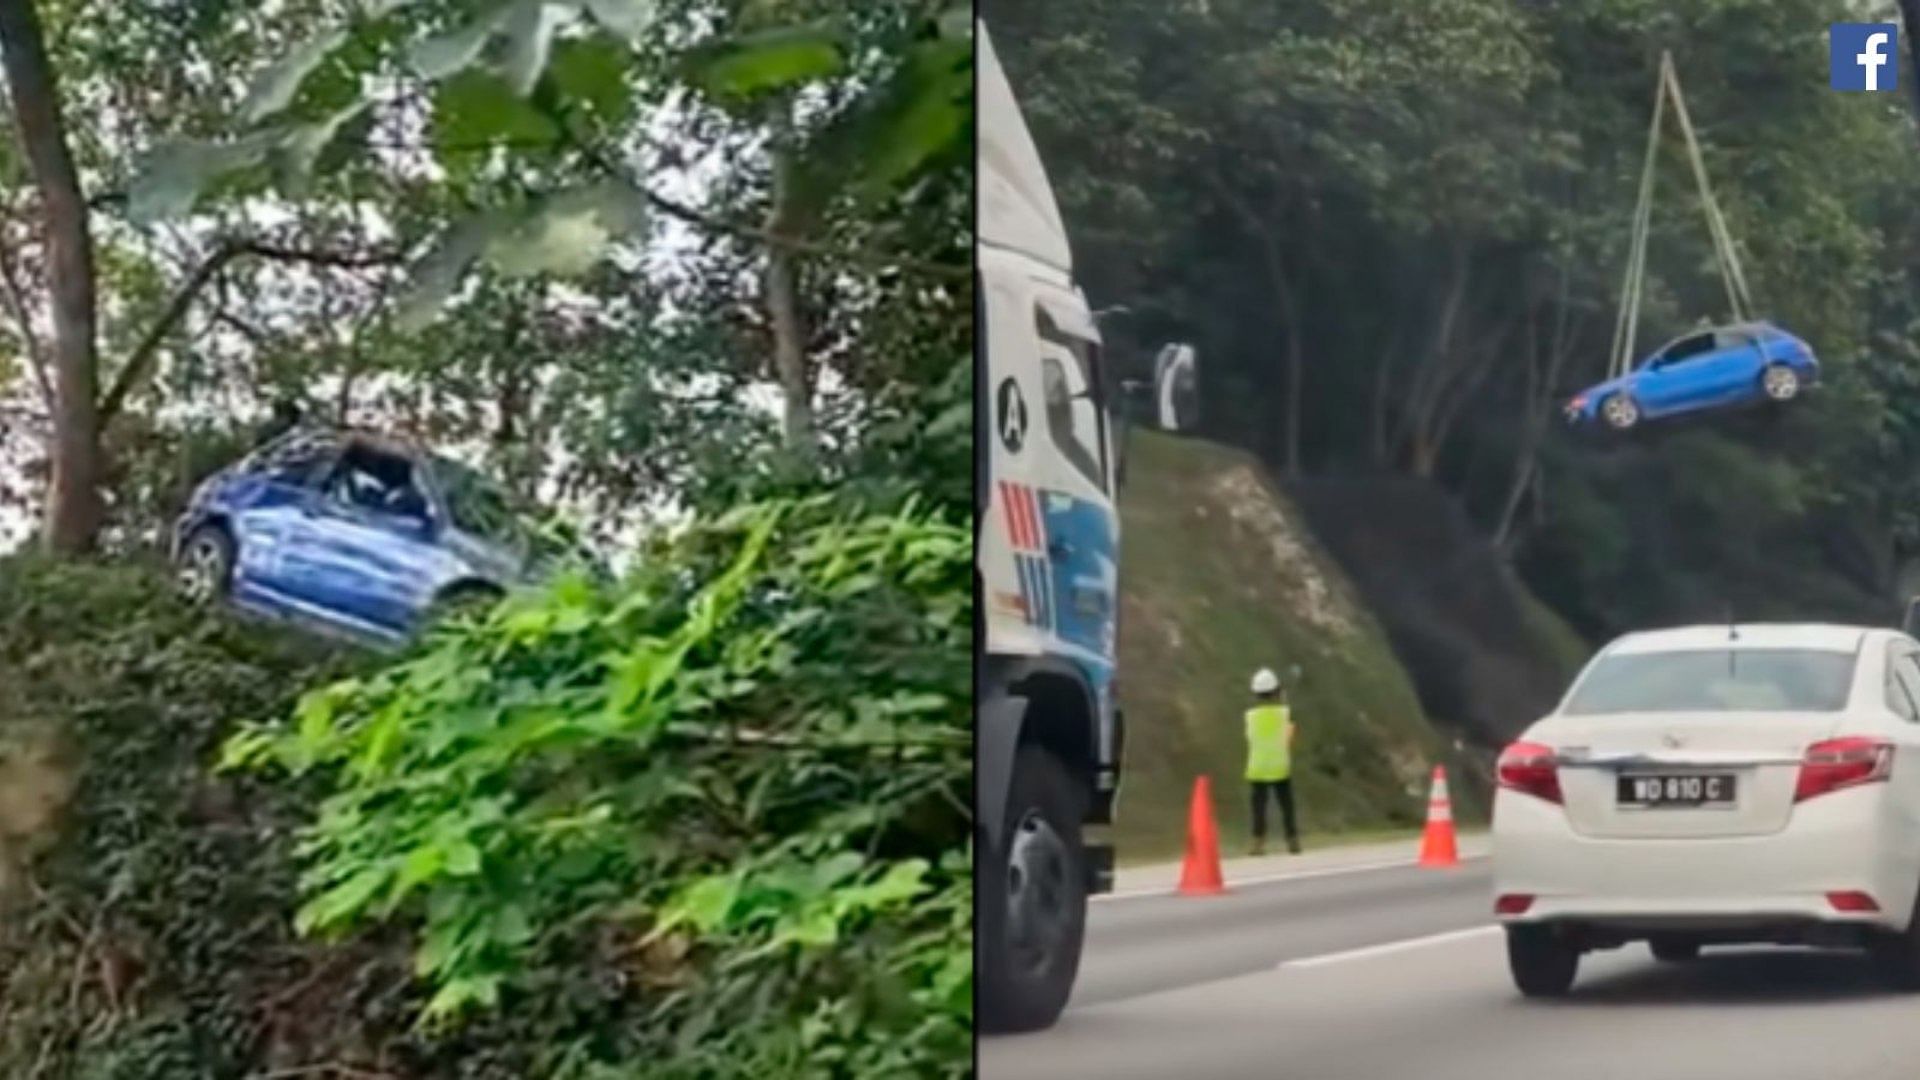 Viral video shows car stuck between trees on hill slope, netizens react with possible theories